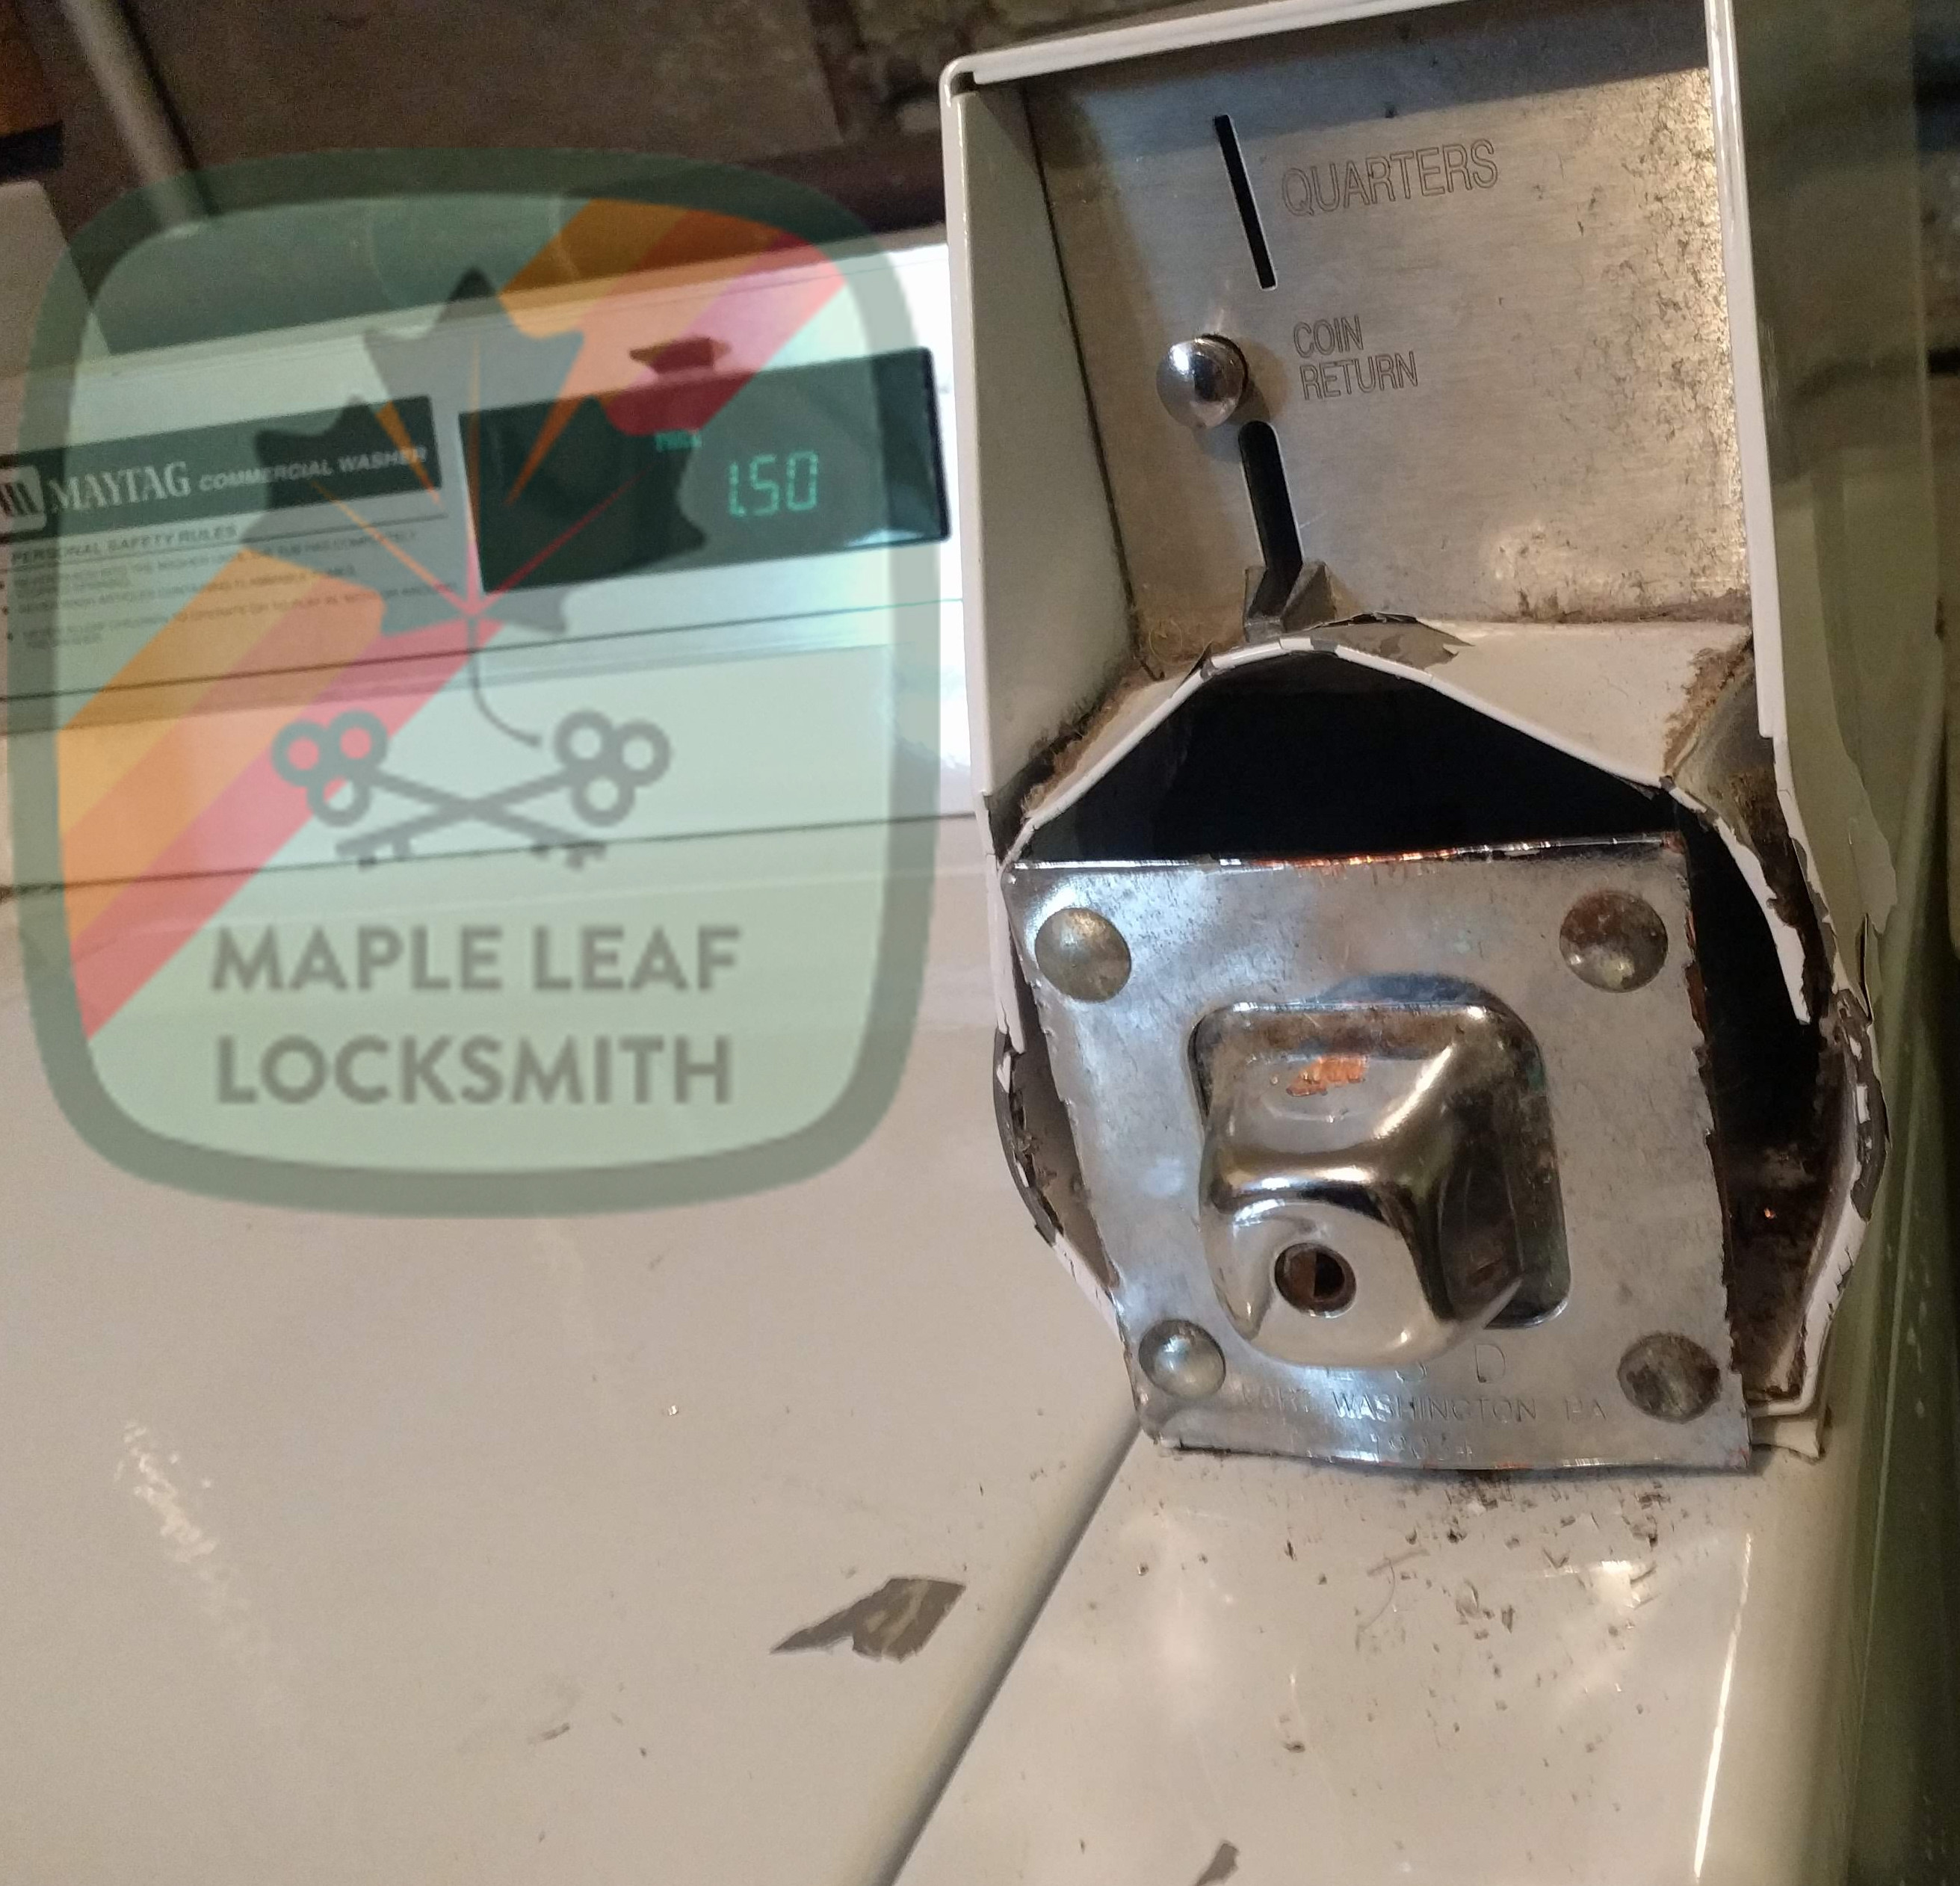 A laundry machine coin box that was broken into